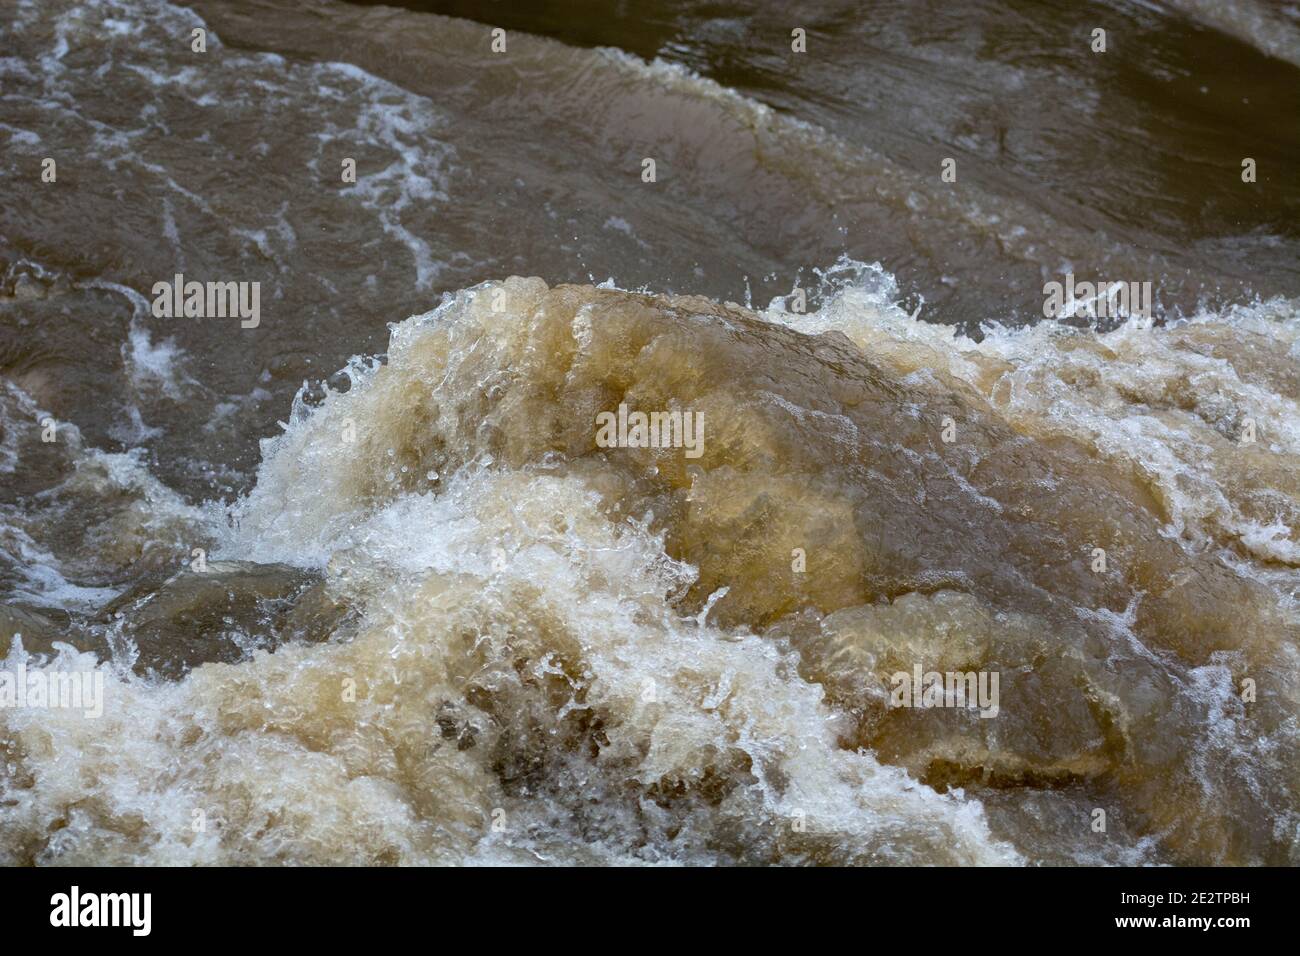 Turbulent water at a weir after heavy rainfall, Warwickshire, UK Stock Photo